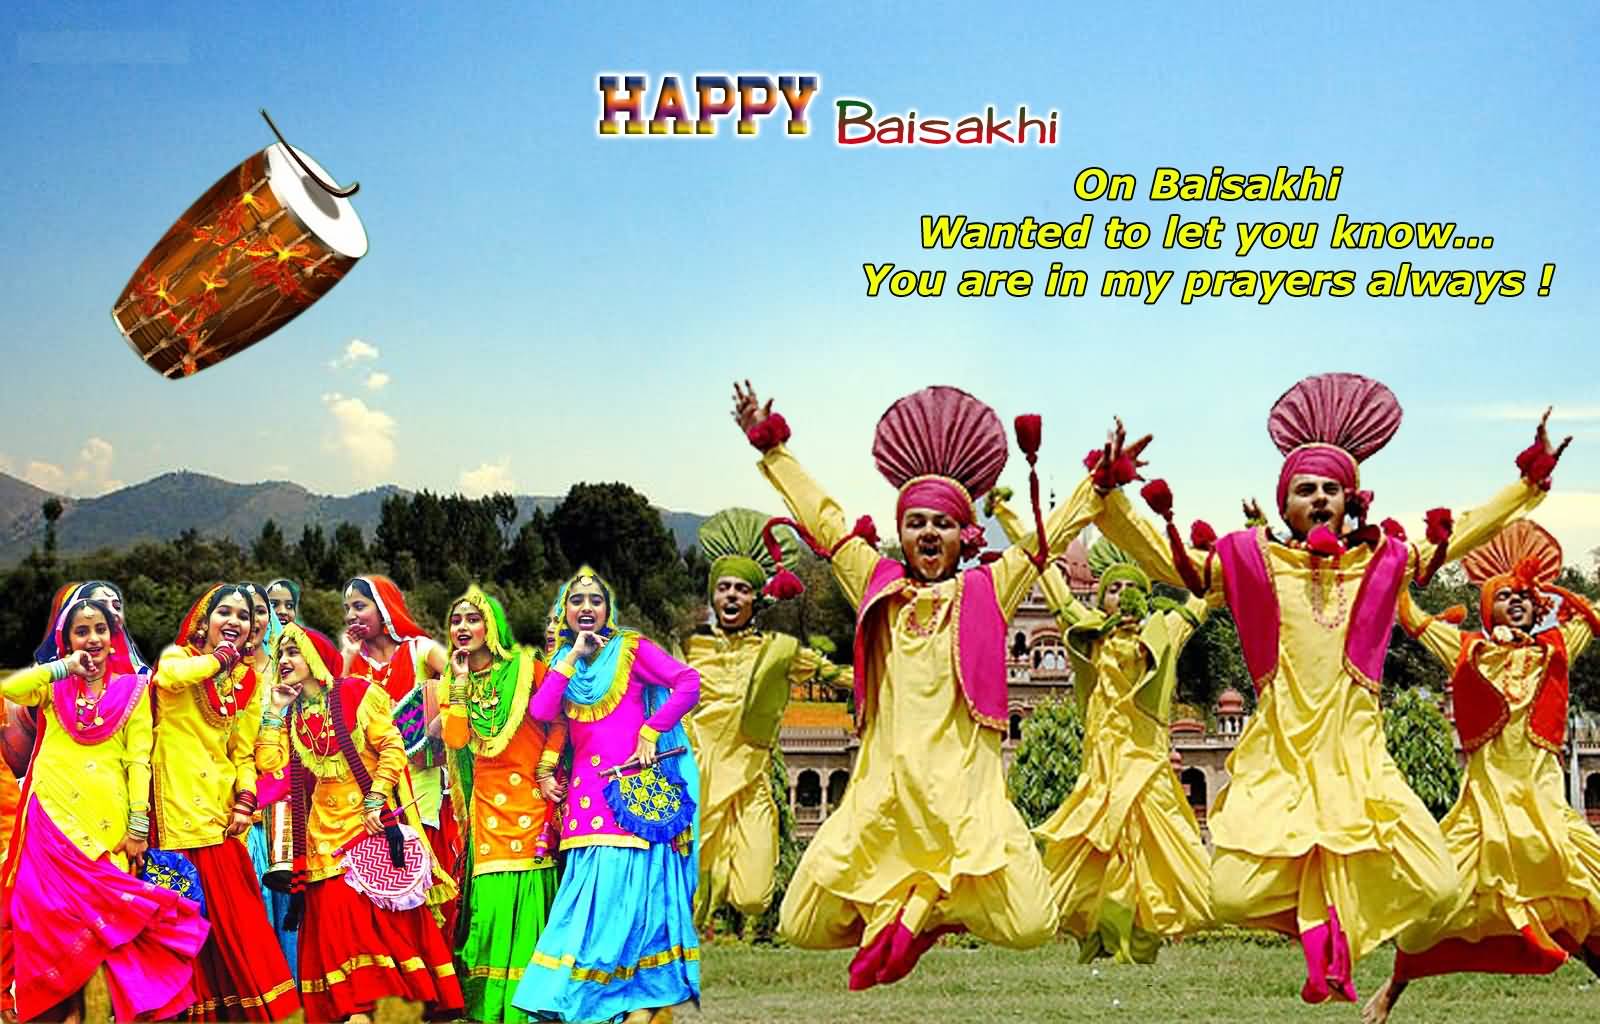 Happy Baisakhi On Baisakhi Wanted To Let You Know You Are In My Prayers Always